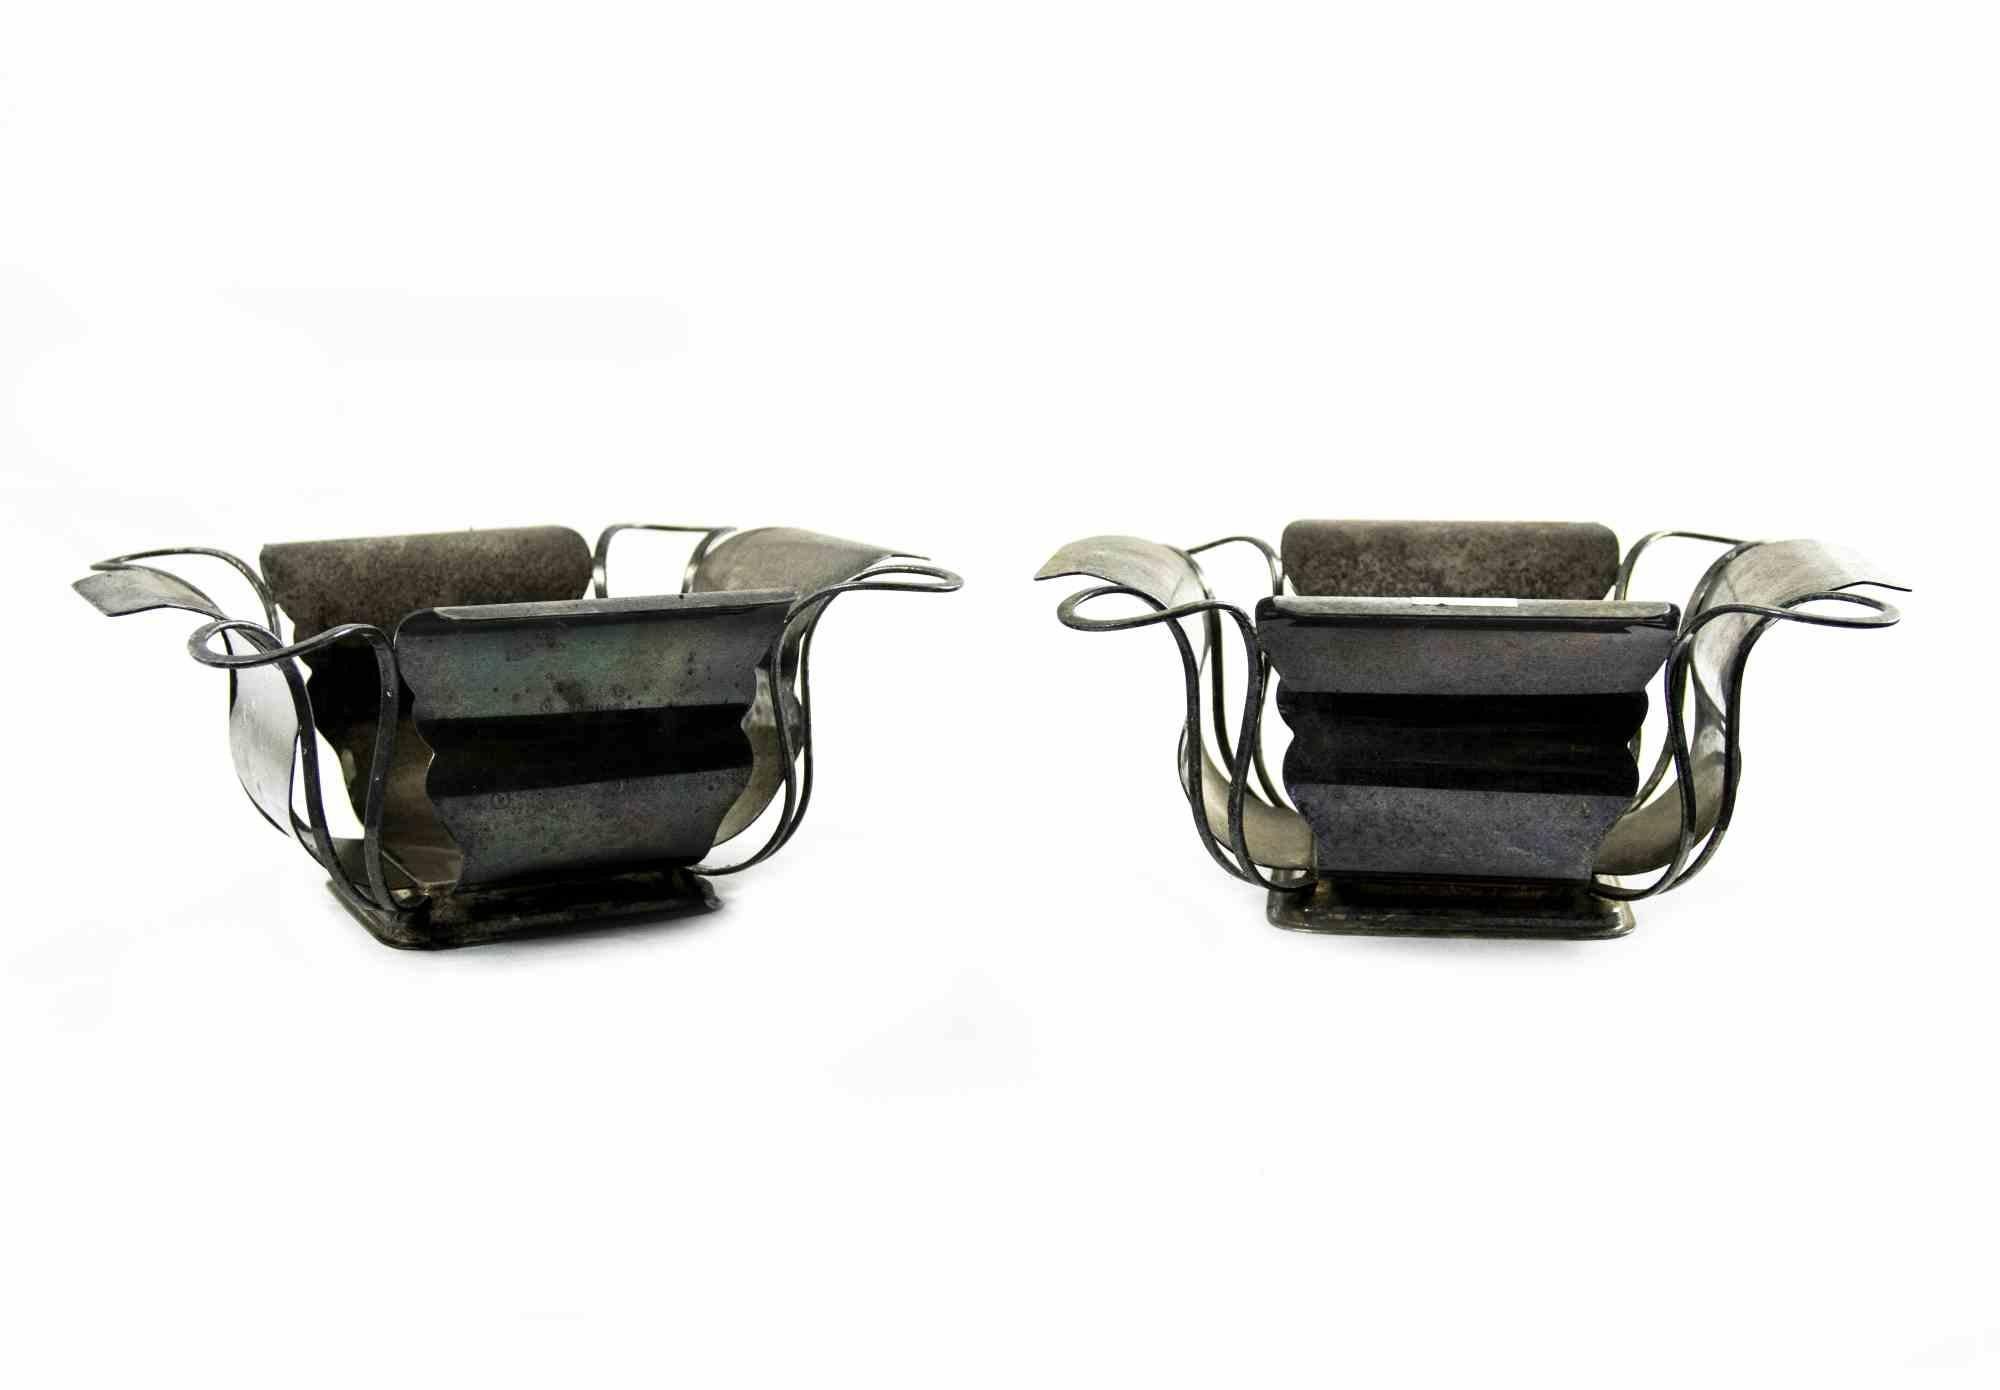 Pair of metal centrepiece is an original decorative object realized in the Mid-20th Century.

Made in Italy.

The centerpieces are in good conditions. Some dirty spots on the surface are present. 

Total dimensions: 11 x 26 x 26 cm.